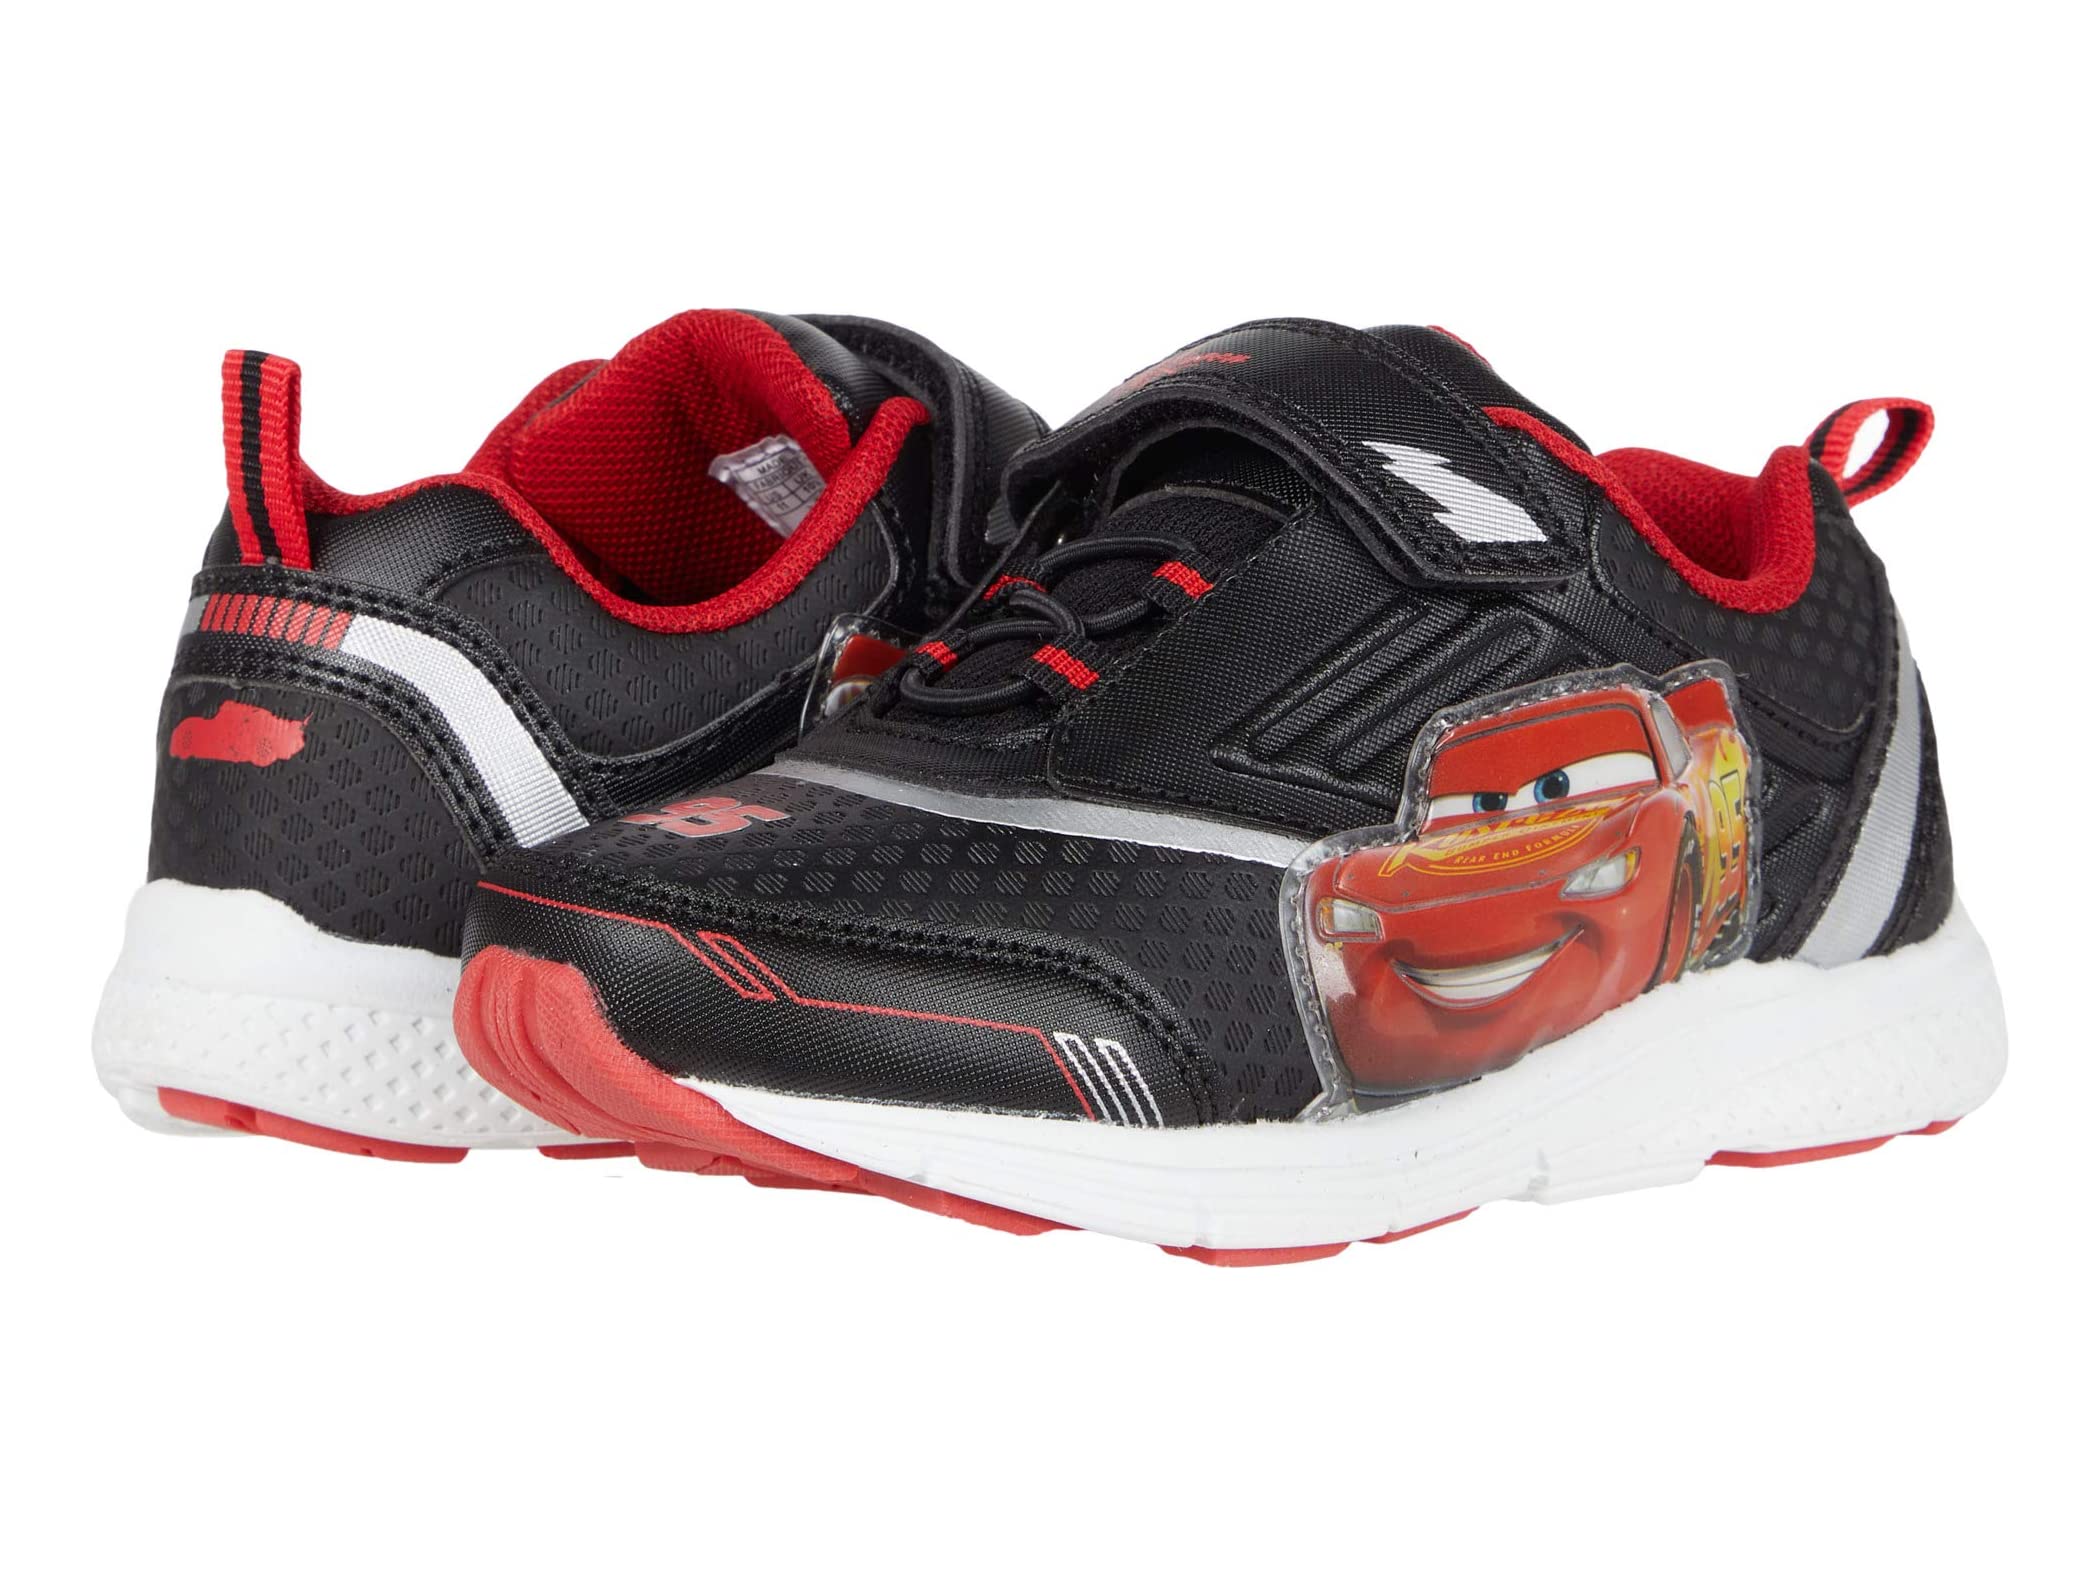 Disney Cars Boys Sneakers Lightning McQueen Toddler Light-Up Shoes, 7-12 - image 1 of 7